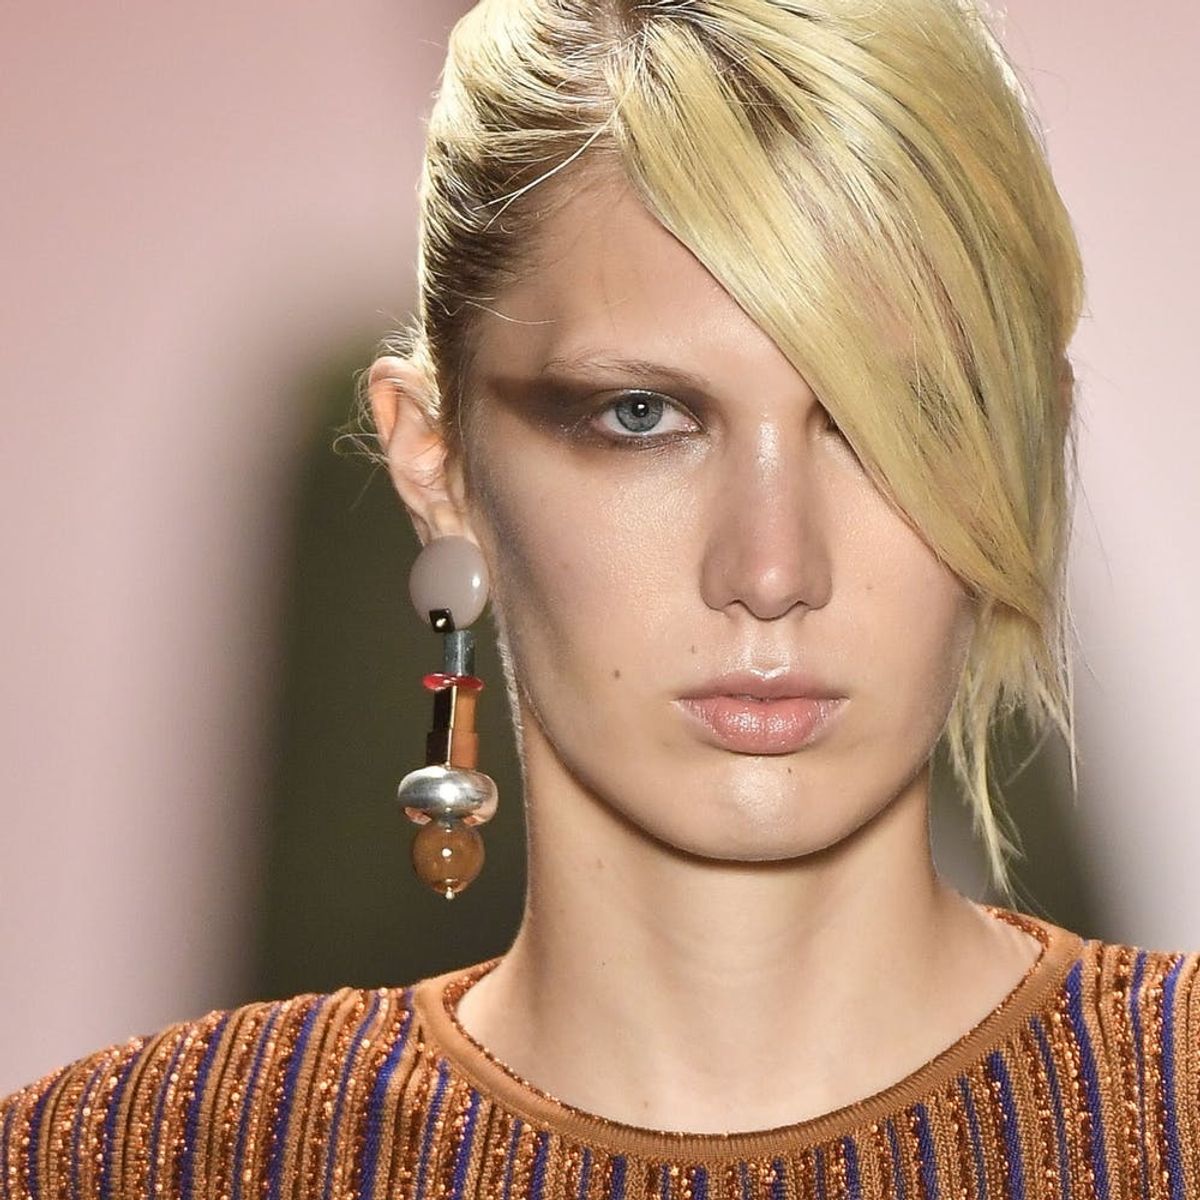 7 Festival Beauty Ideas Straight from the Runway